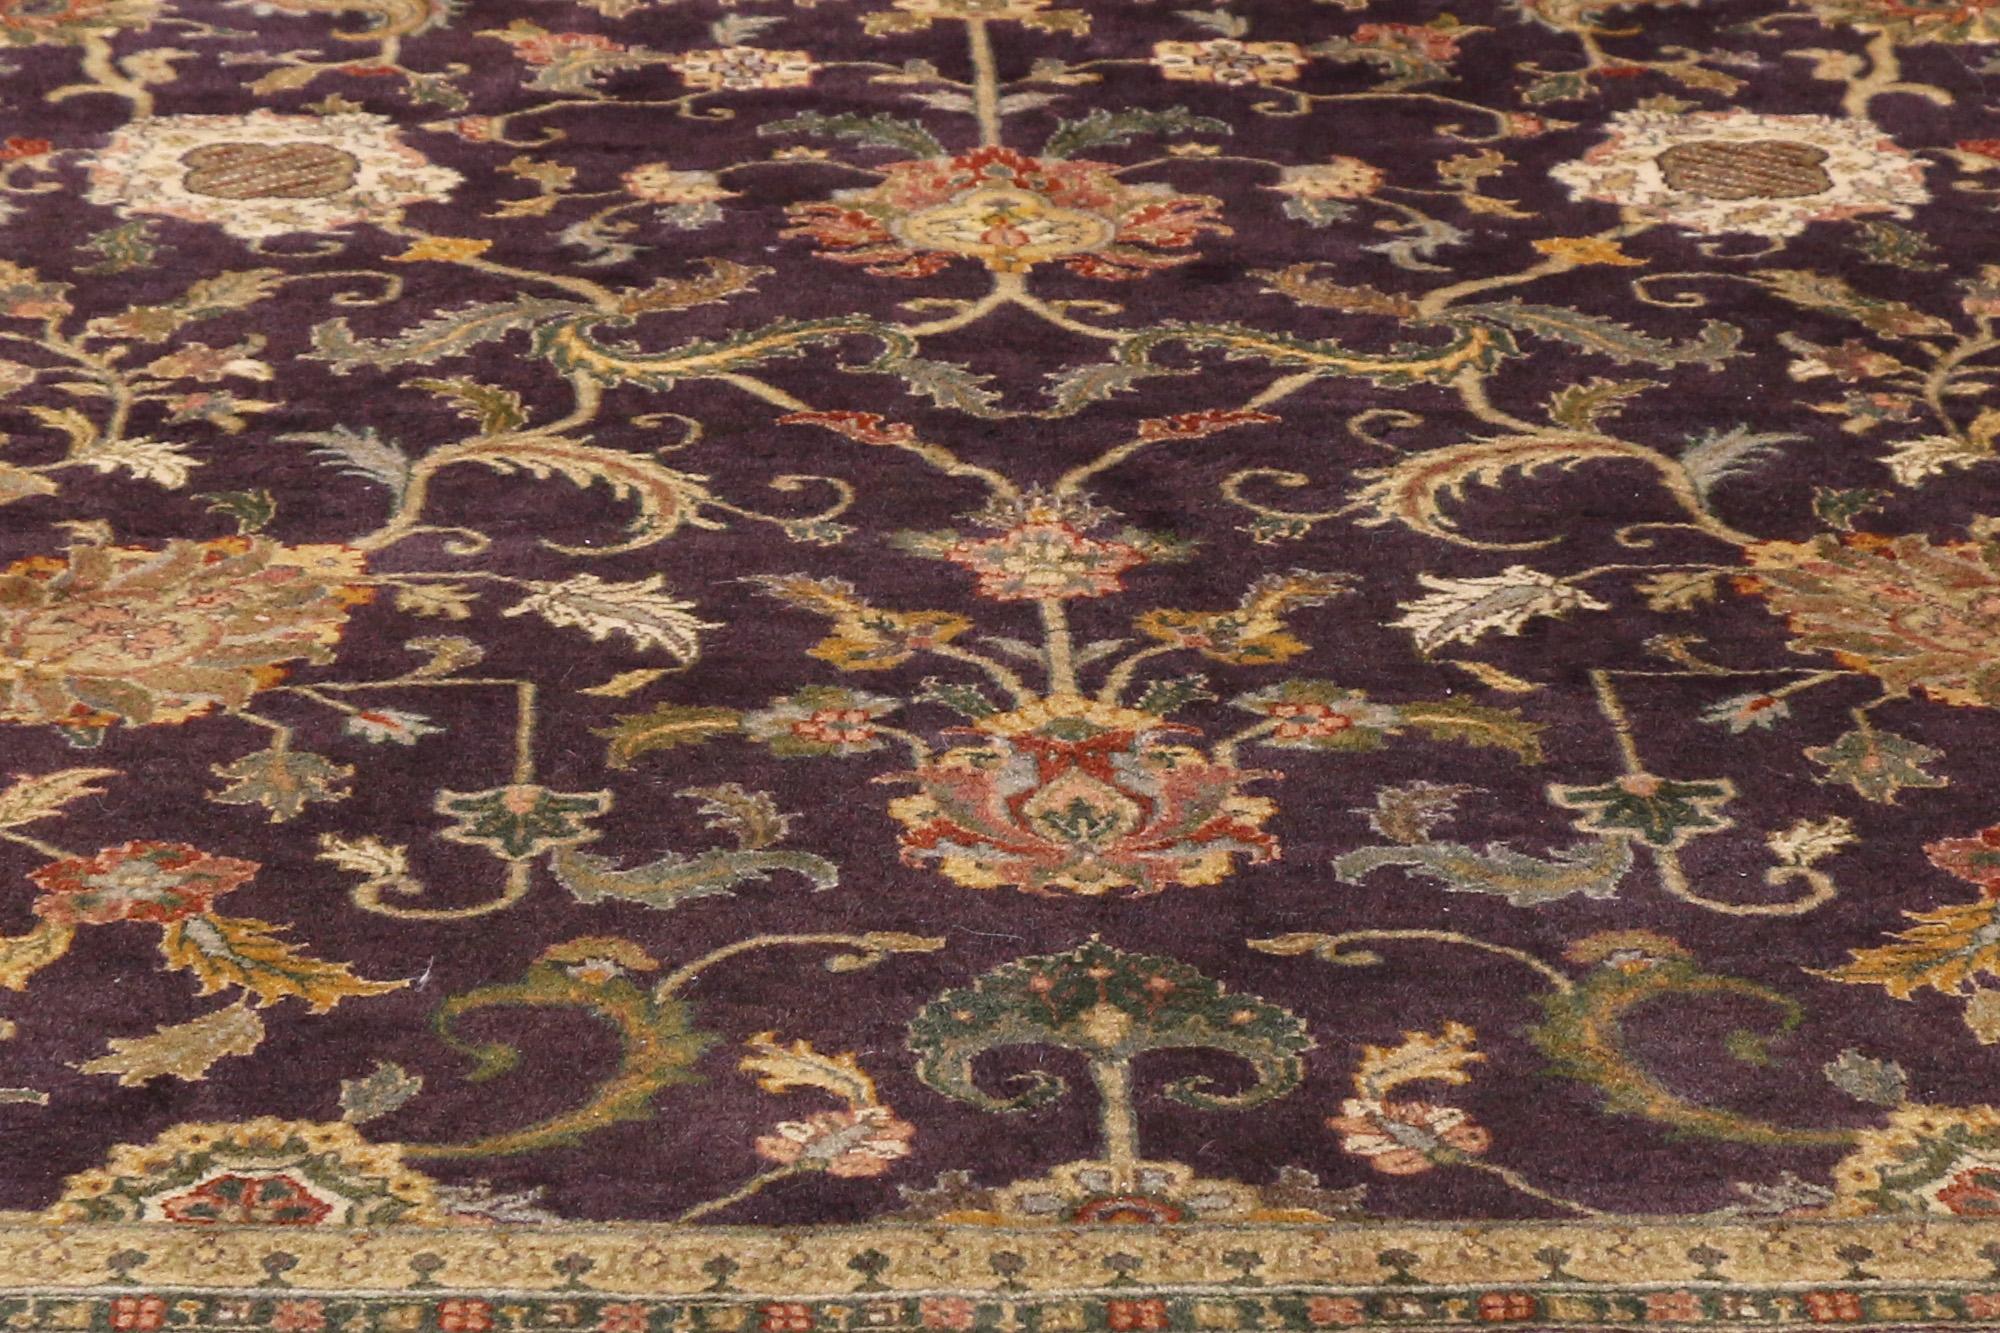 Hand-Knotted Vintage Aubergine Indian Palatial Carpet, 11'03 x 17'08 For Sale